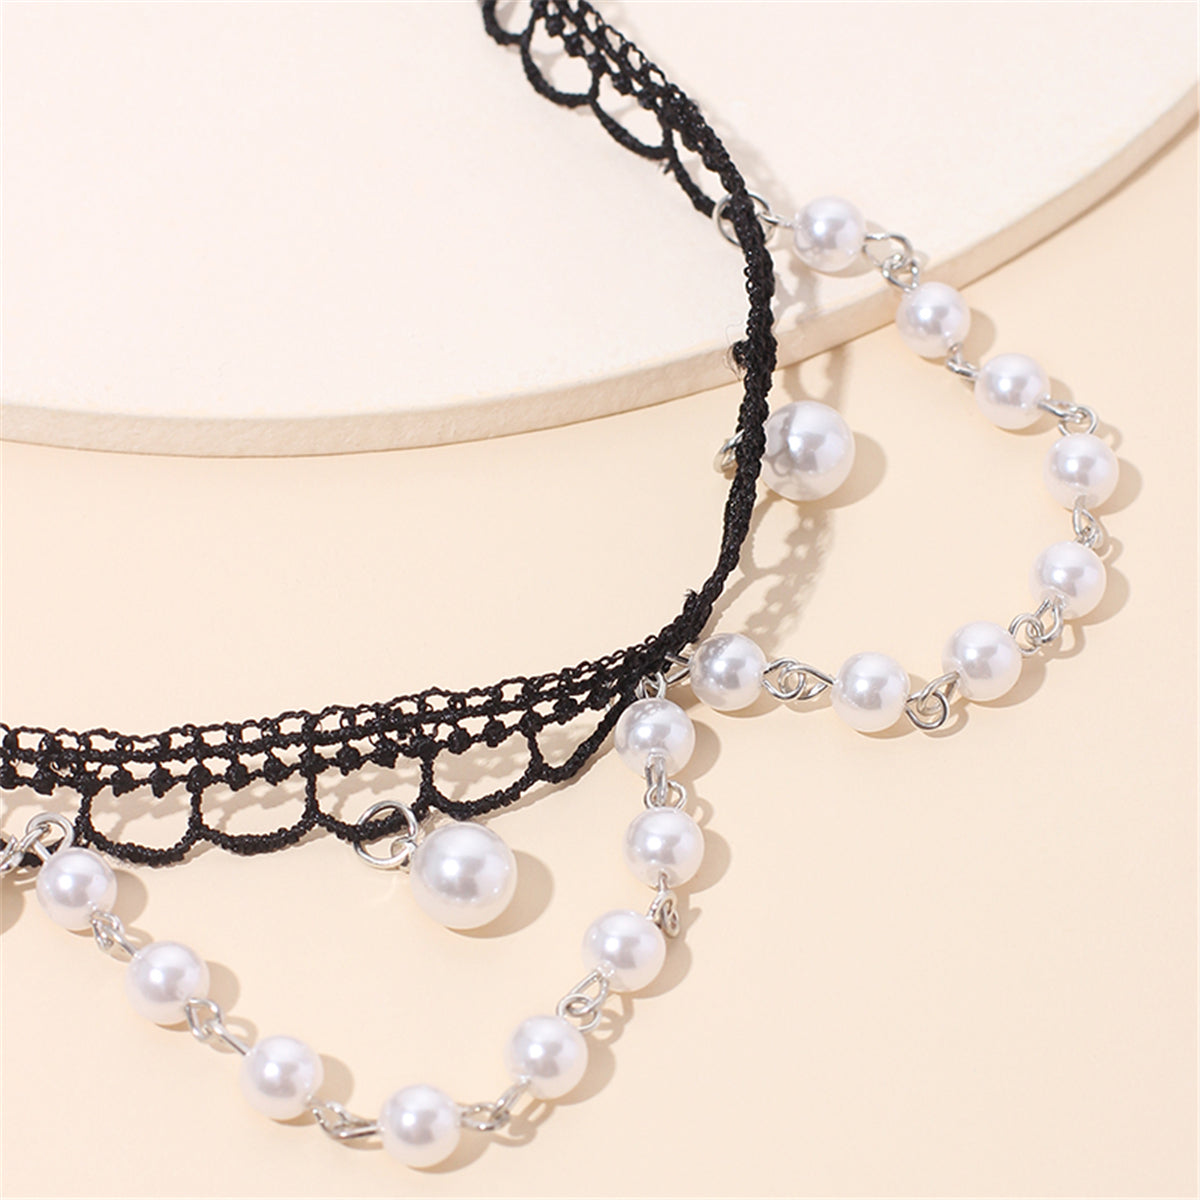 Pearl & Silver-Plated Tasseled Lace Choker Necklace